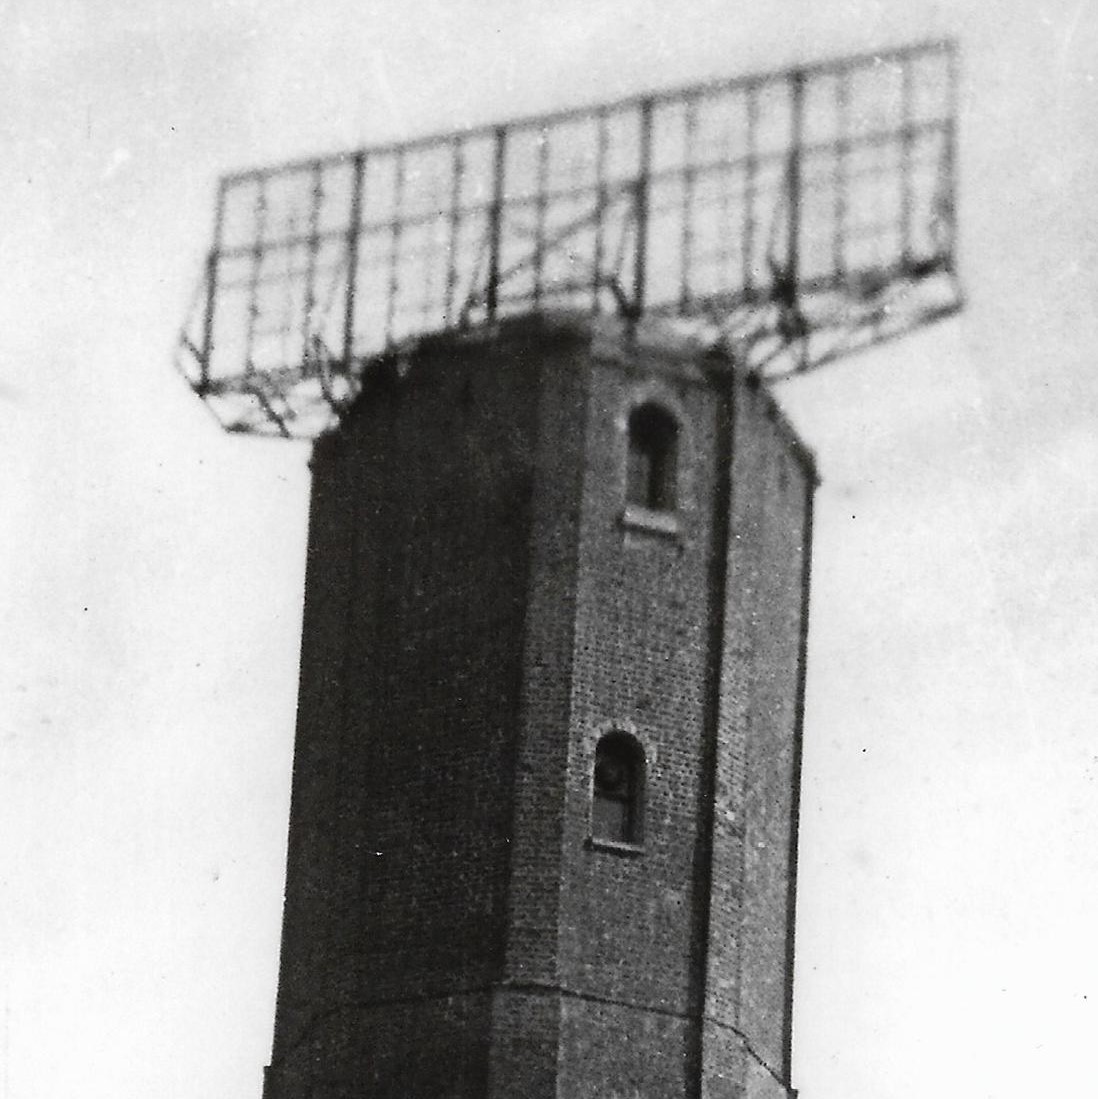 A black and white photo of the RDF array (aerial) mounted on top of the Naze Tower